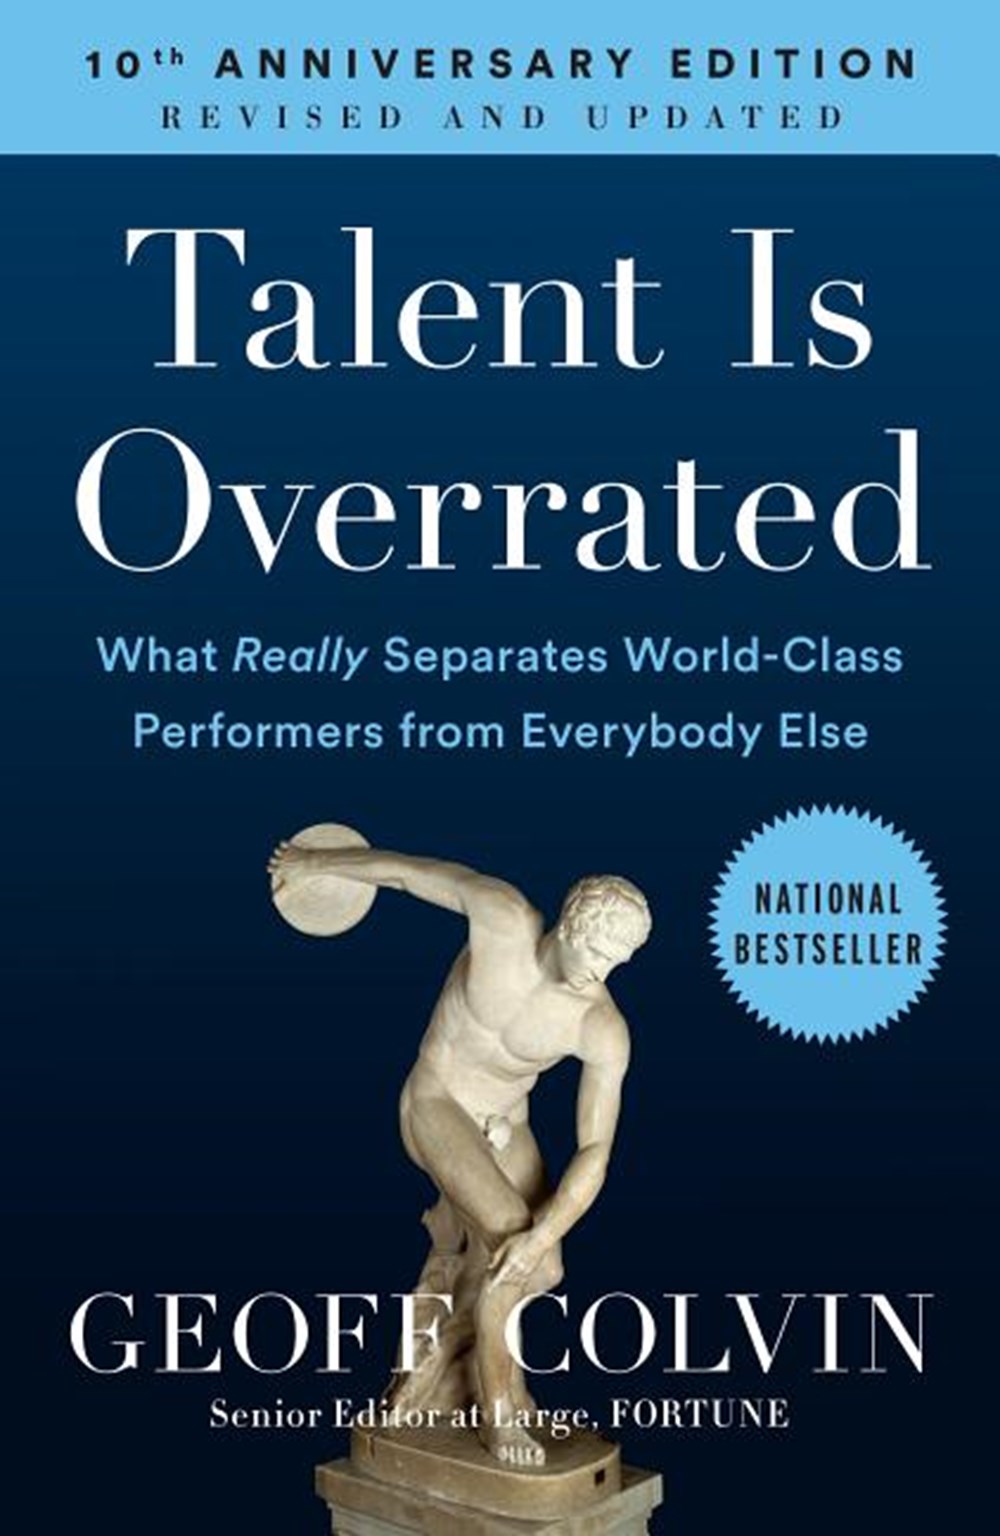 Talent Is Overrated What Really Separates World-Class Performers from Everybody Else